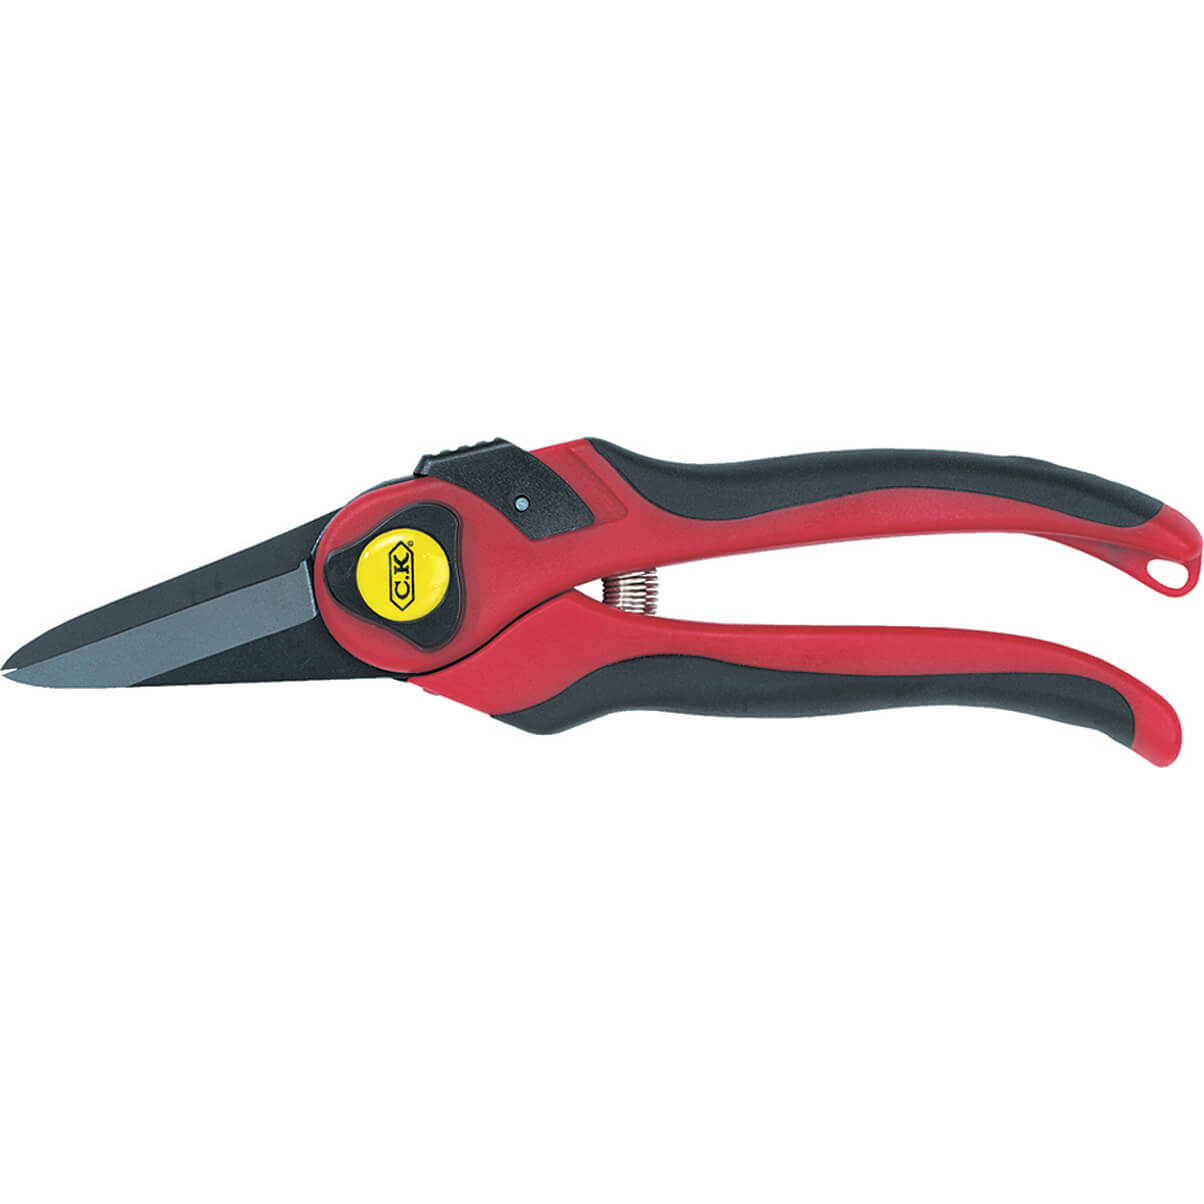 Image of CK Maxima Bypass Pruning Snips